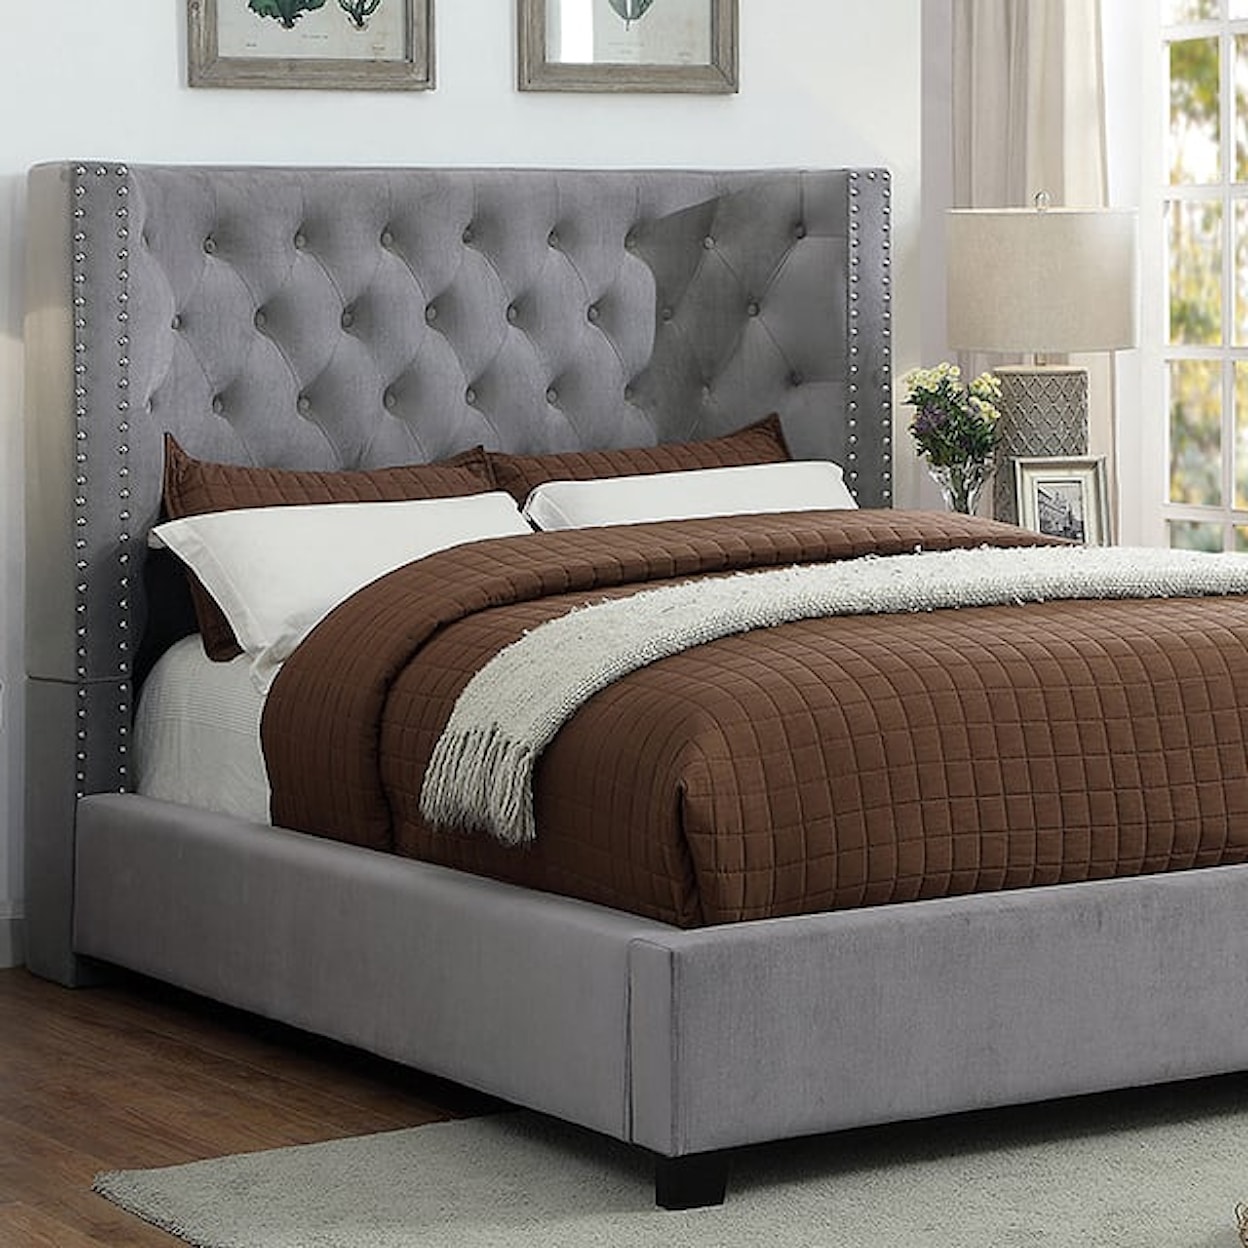 Furniture of America Carley Queen Bed